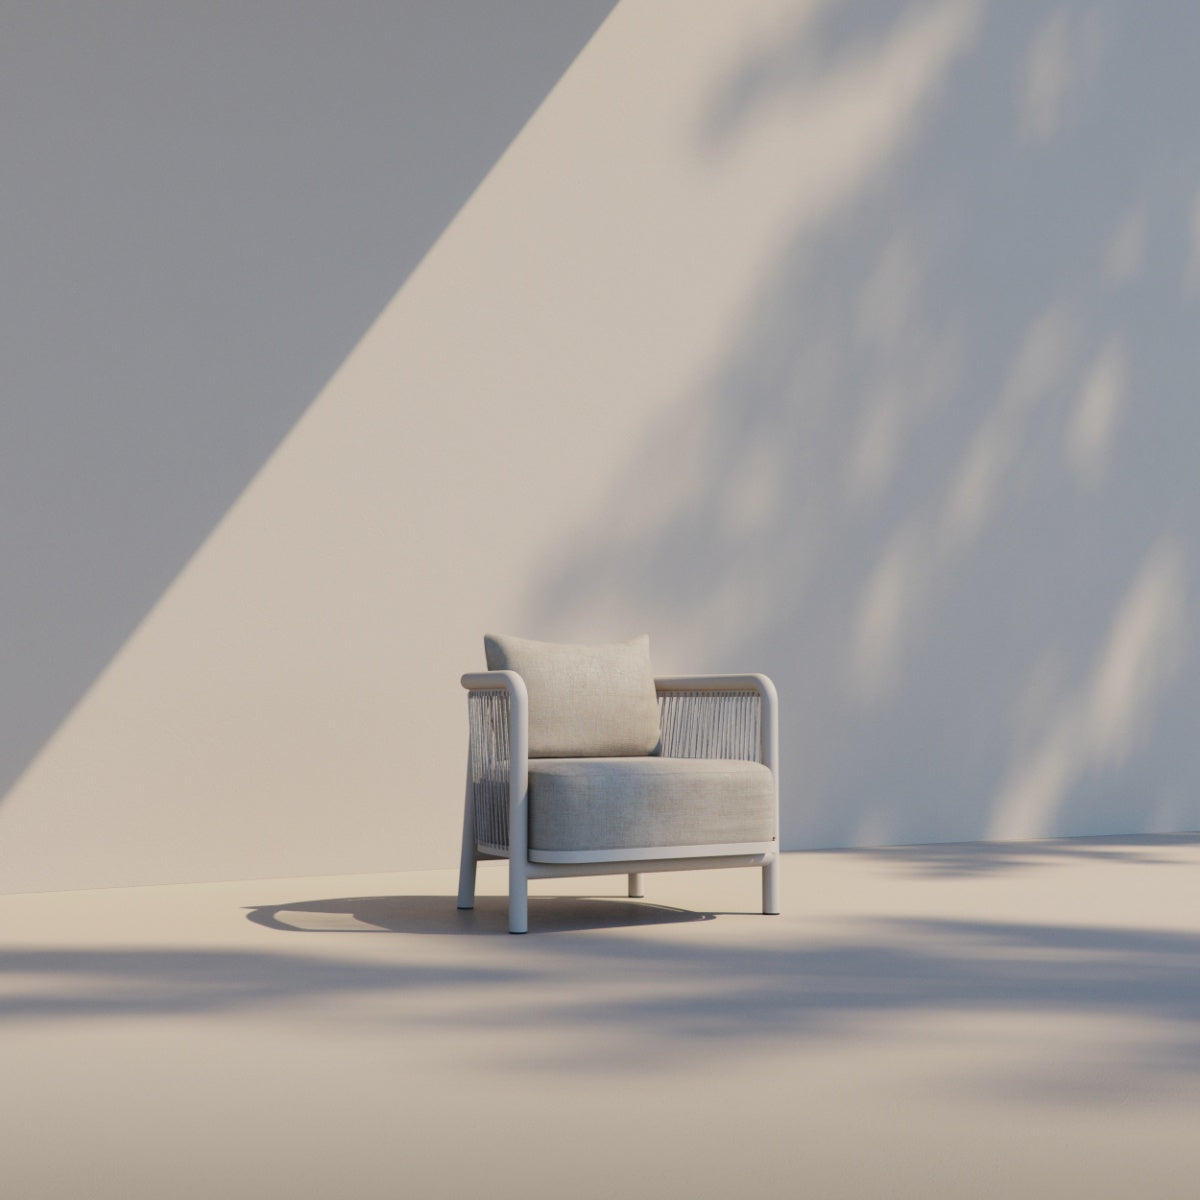 Kirra Lounge Chair [Contract]